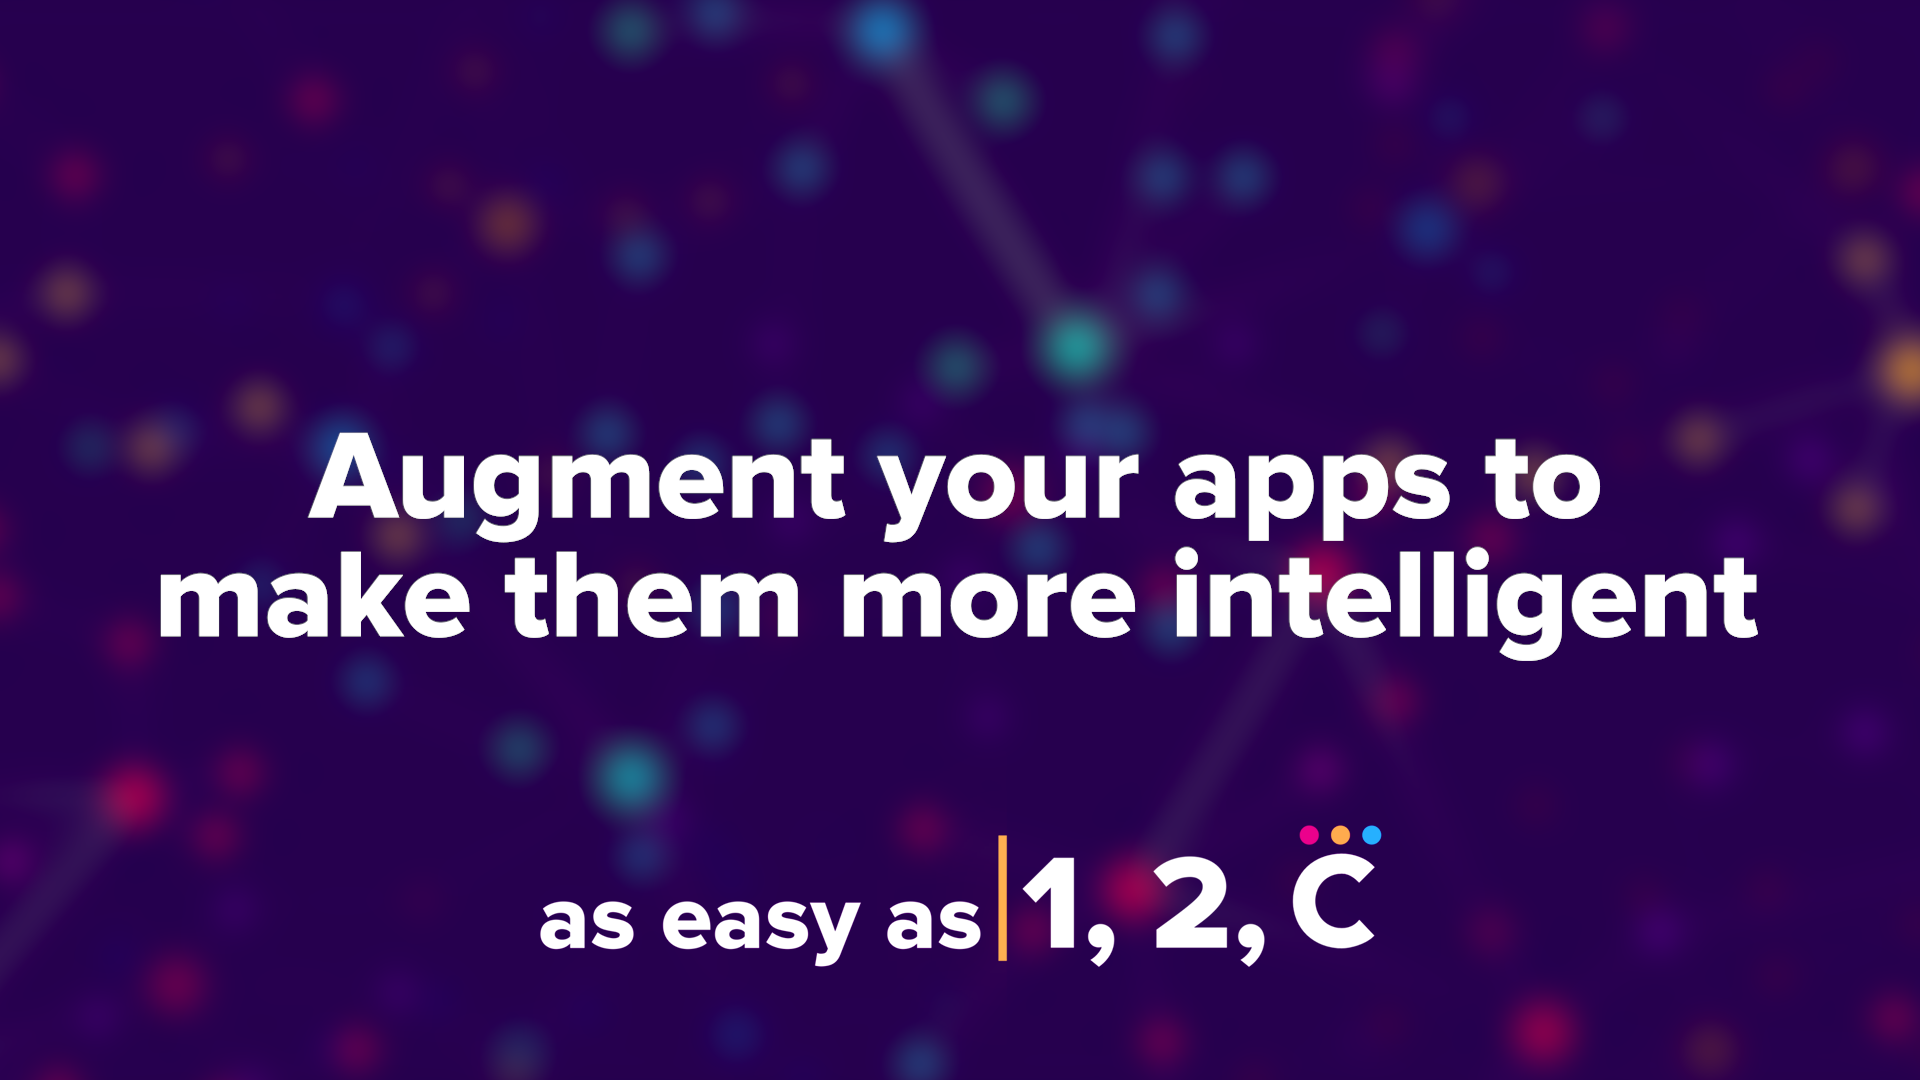 As Easy As 1, 2, C: Augment Your Apps To Make Them More Intelligent